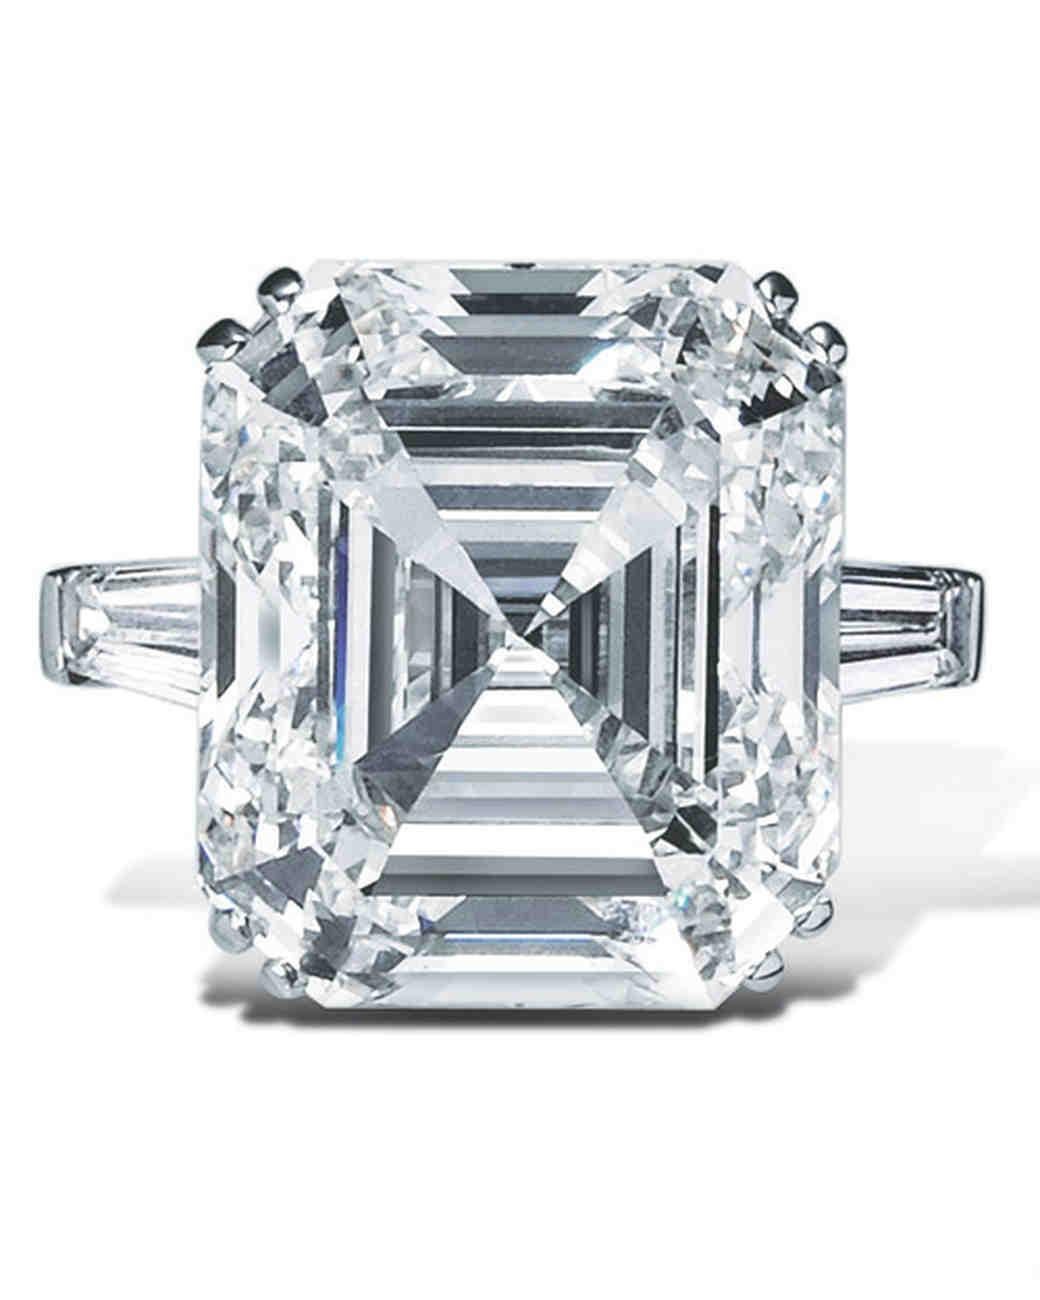 An iconic engagement ring style features an Asscher-cut diamond center stone, given prominence by two tapered baguette side stones, and set on a platinum band. The Classic the three stone setting embodies our collection timeless elegance and